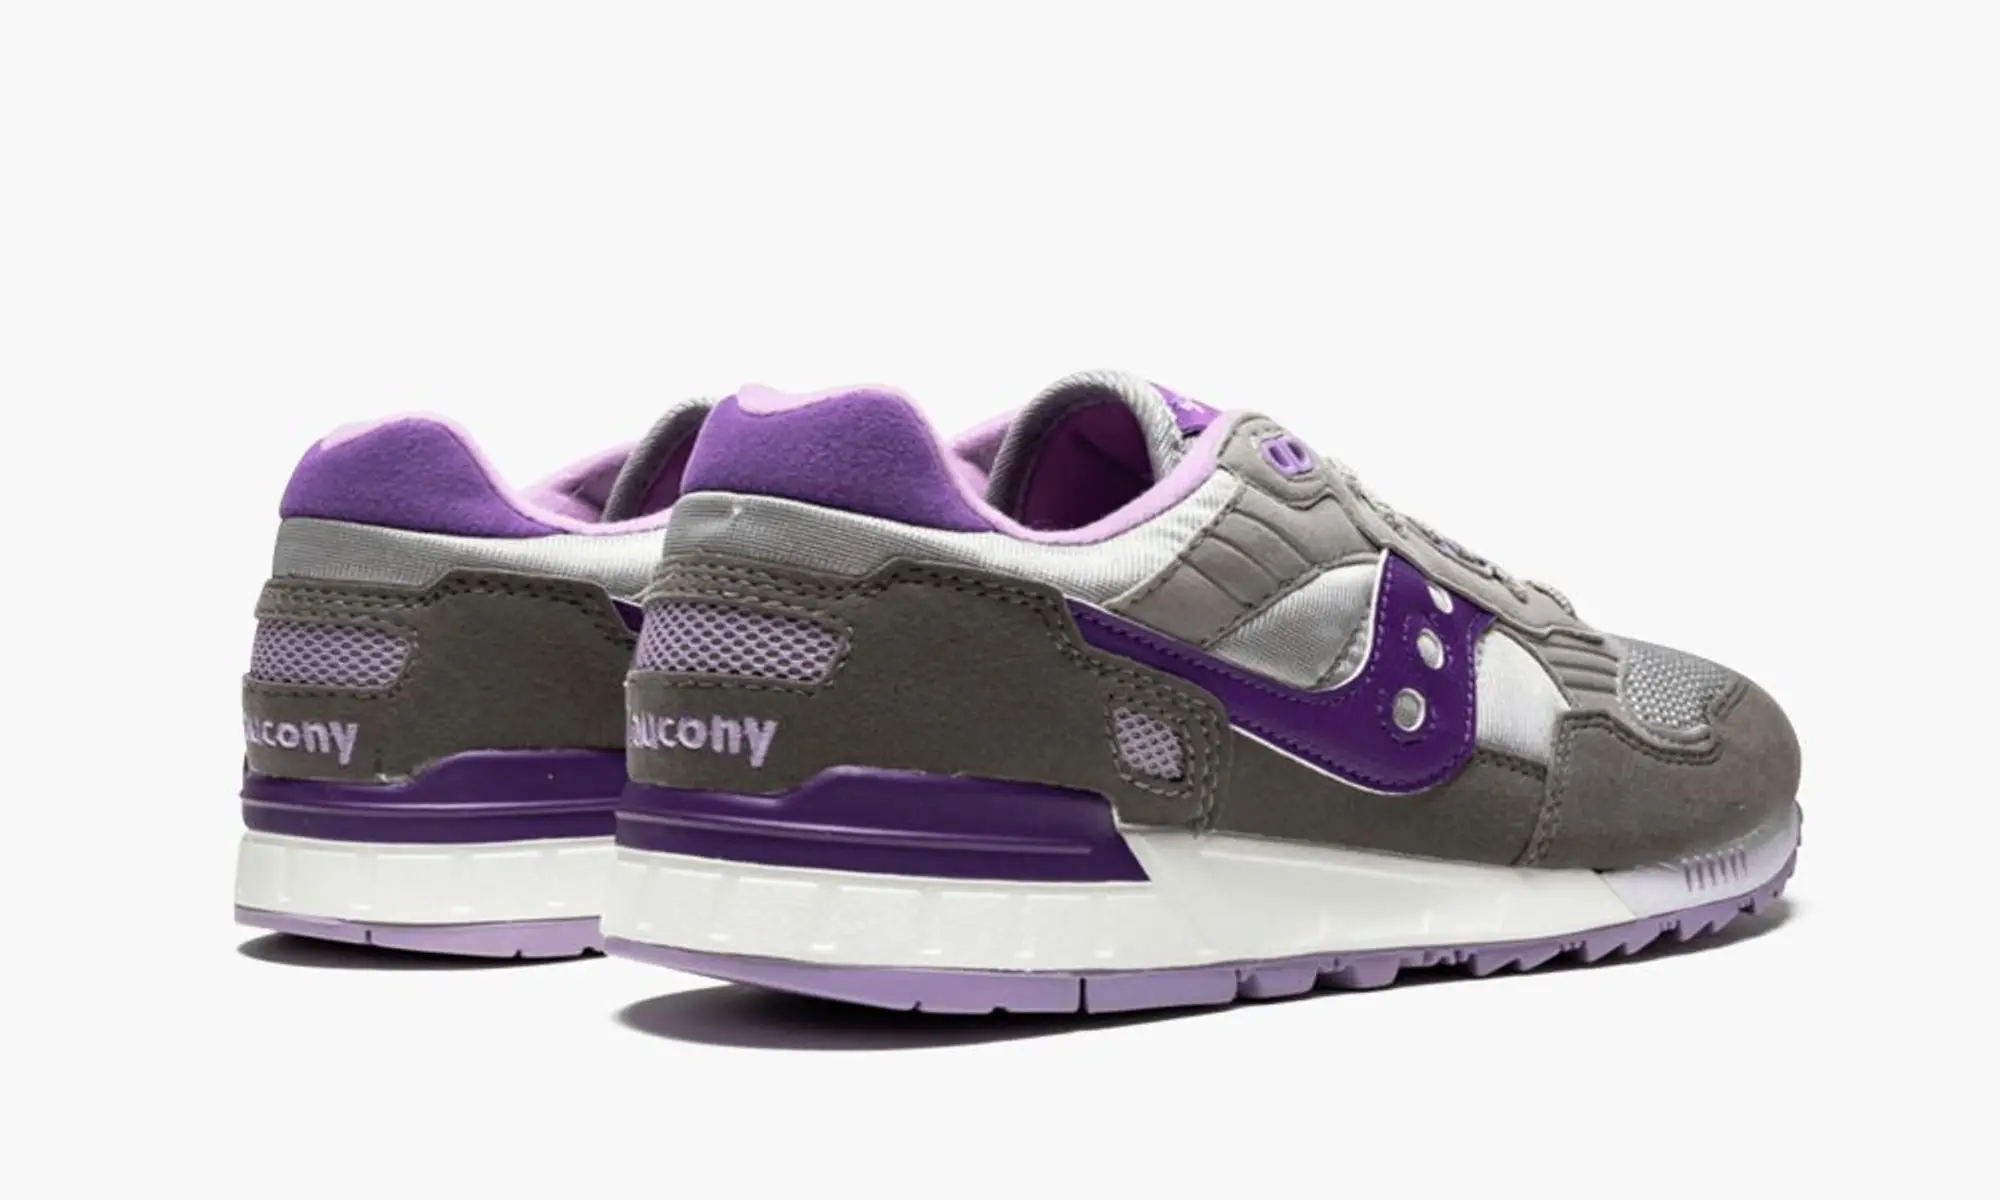 Saucony SHADOW 5000 Shoes